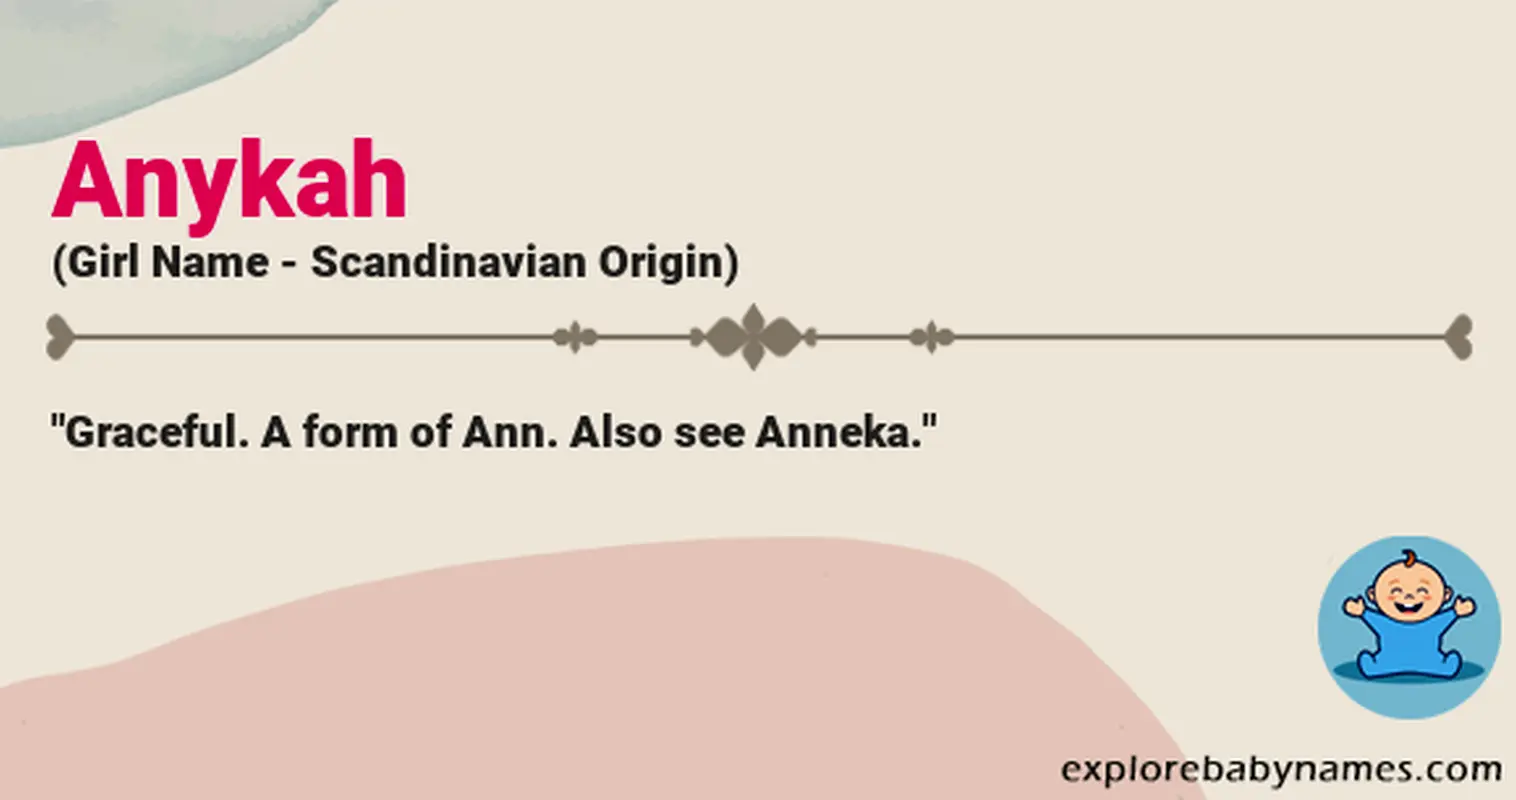 Meaning of Anykah